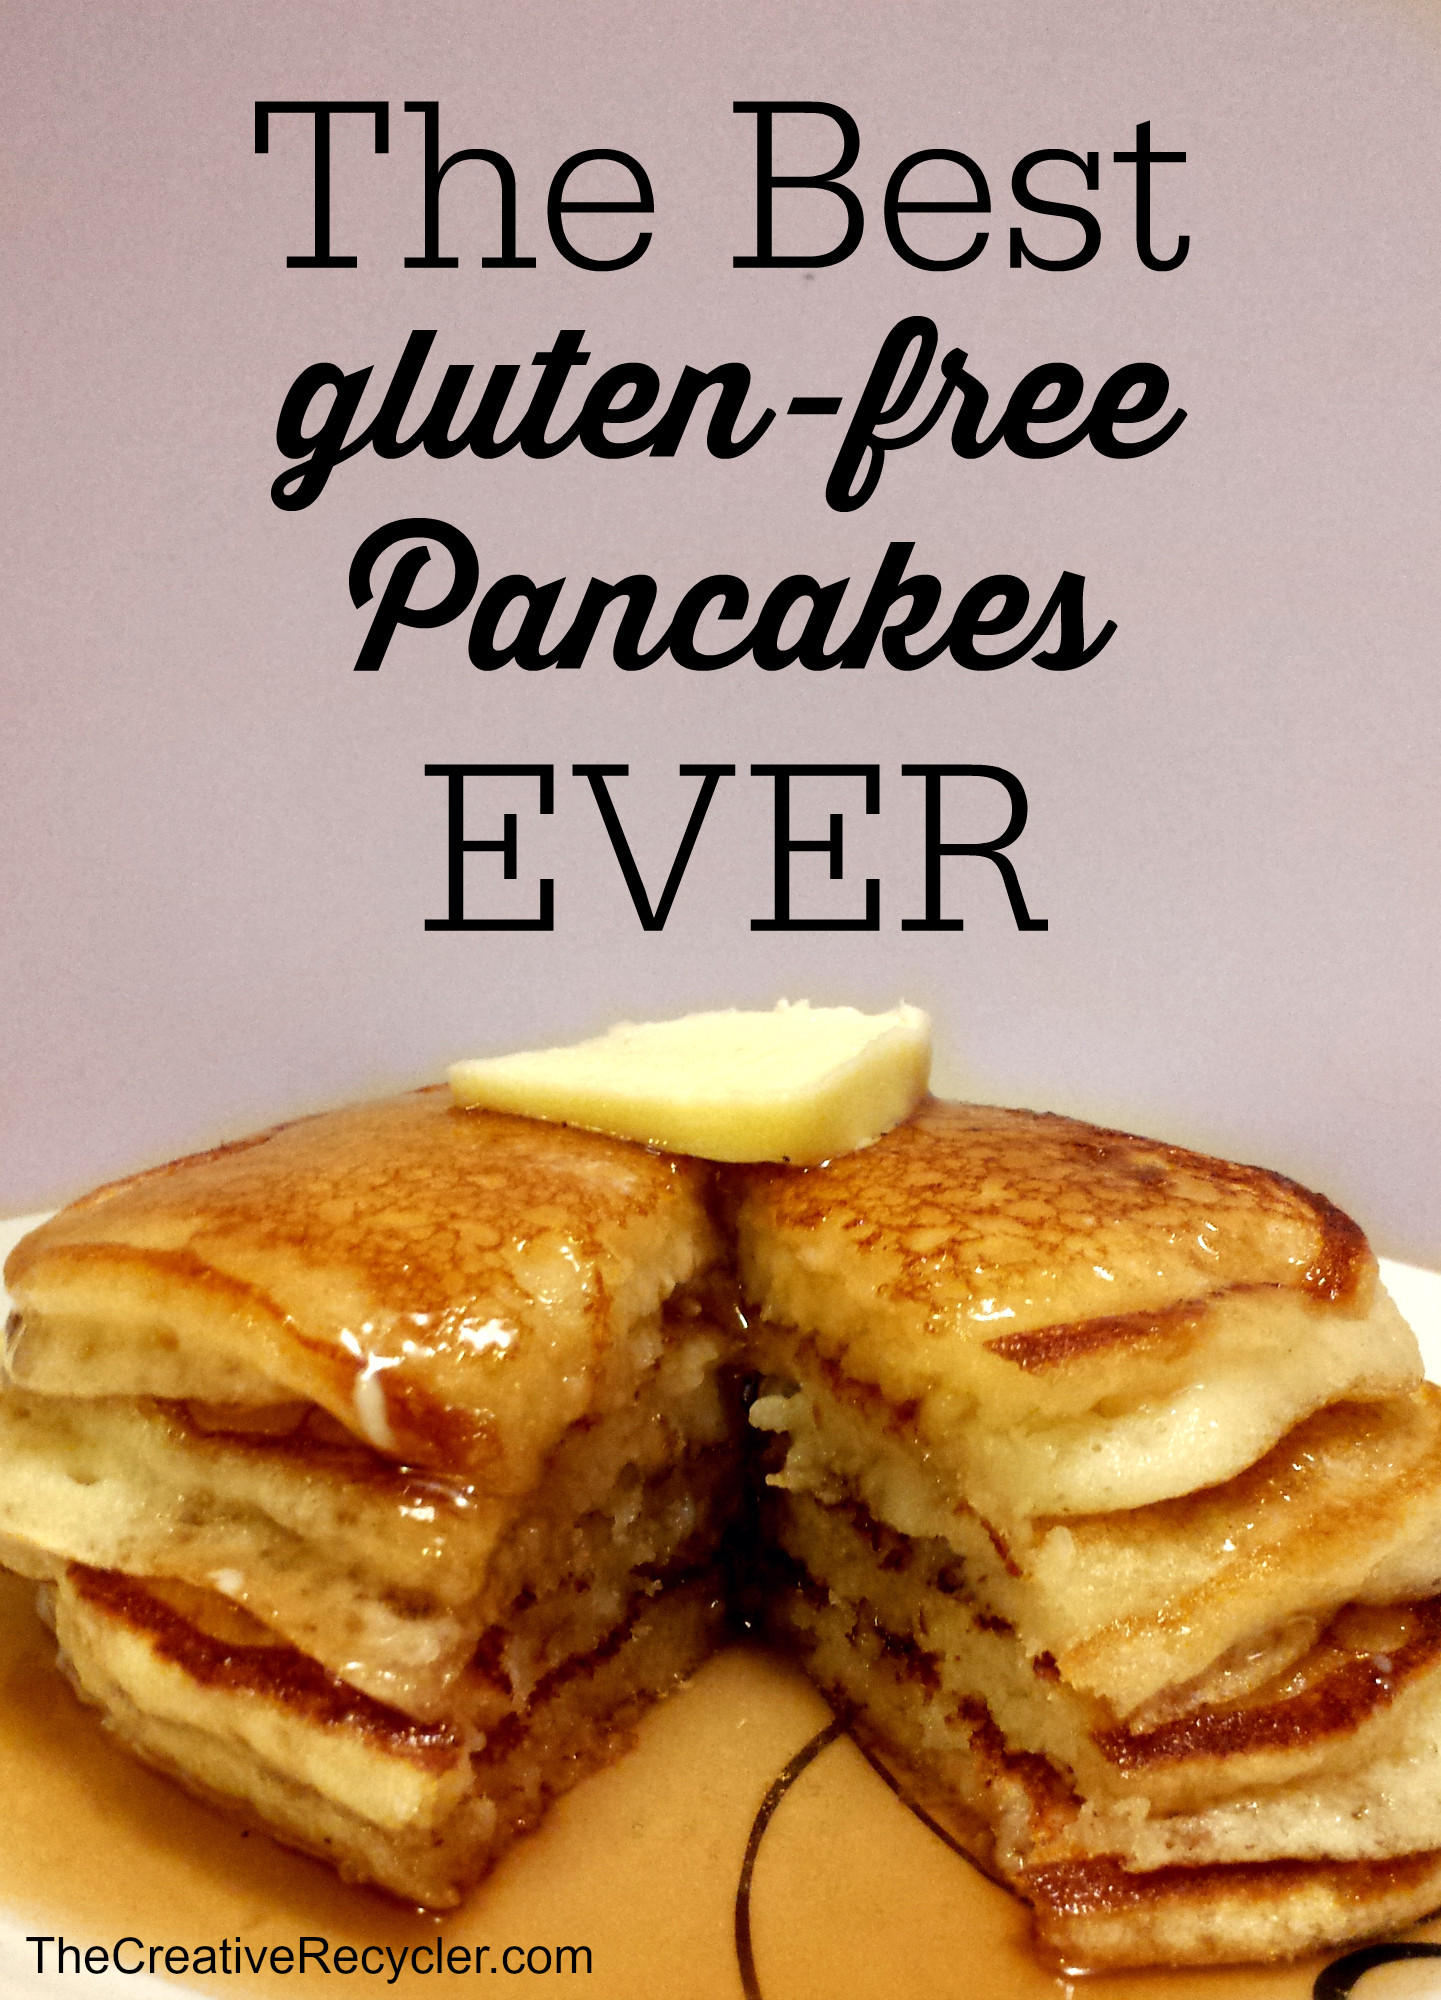 Pancakes Gluten Free
 The Best Gluten Free Pancakes Ever The Creative Recycler